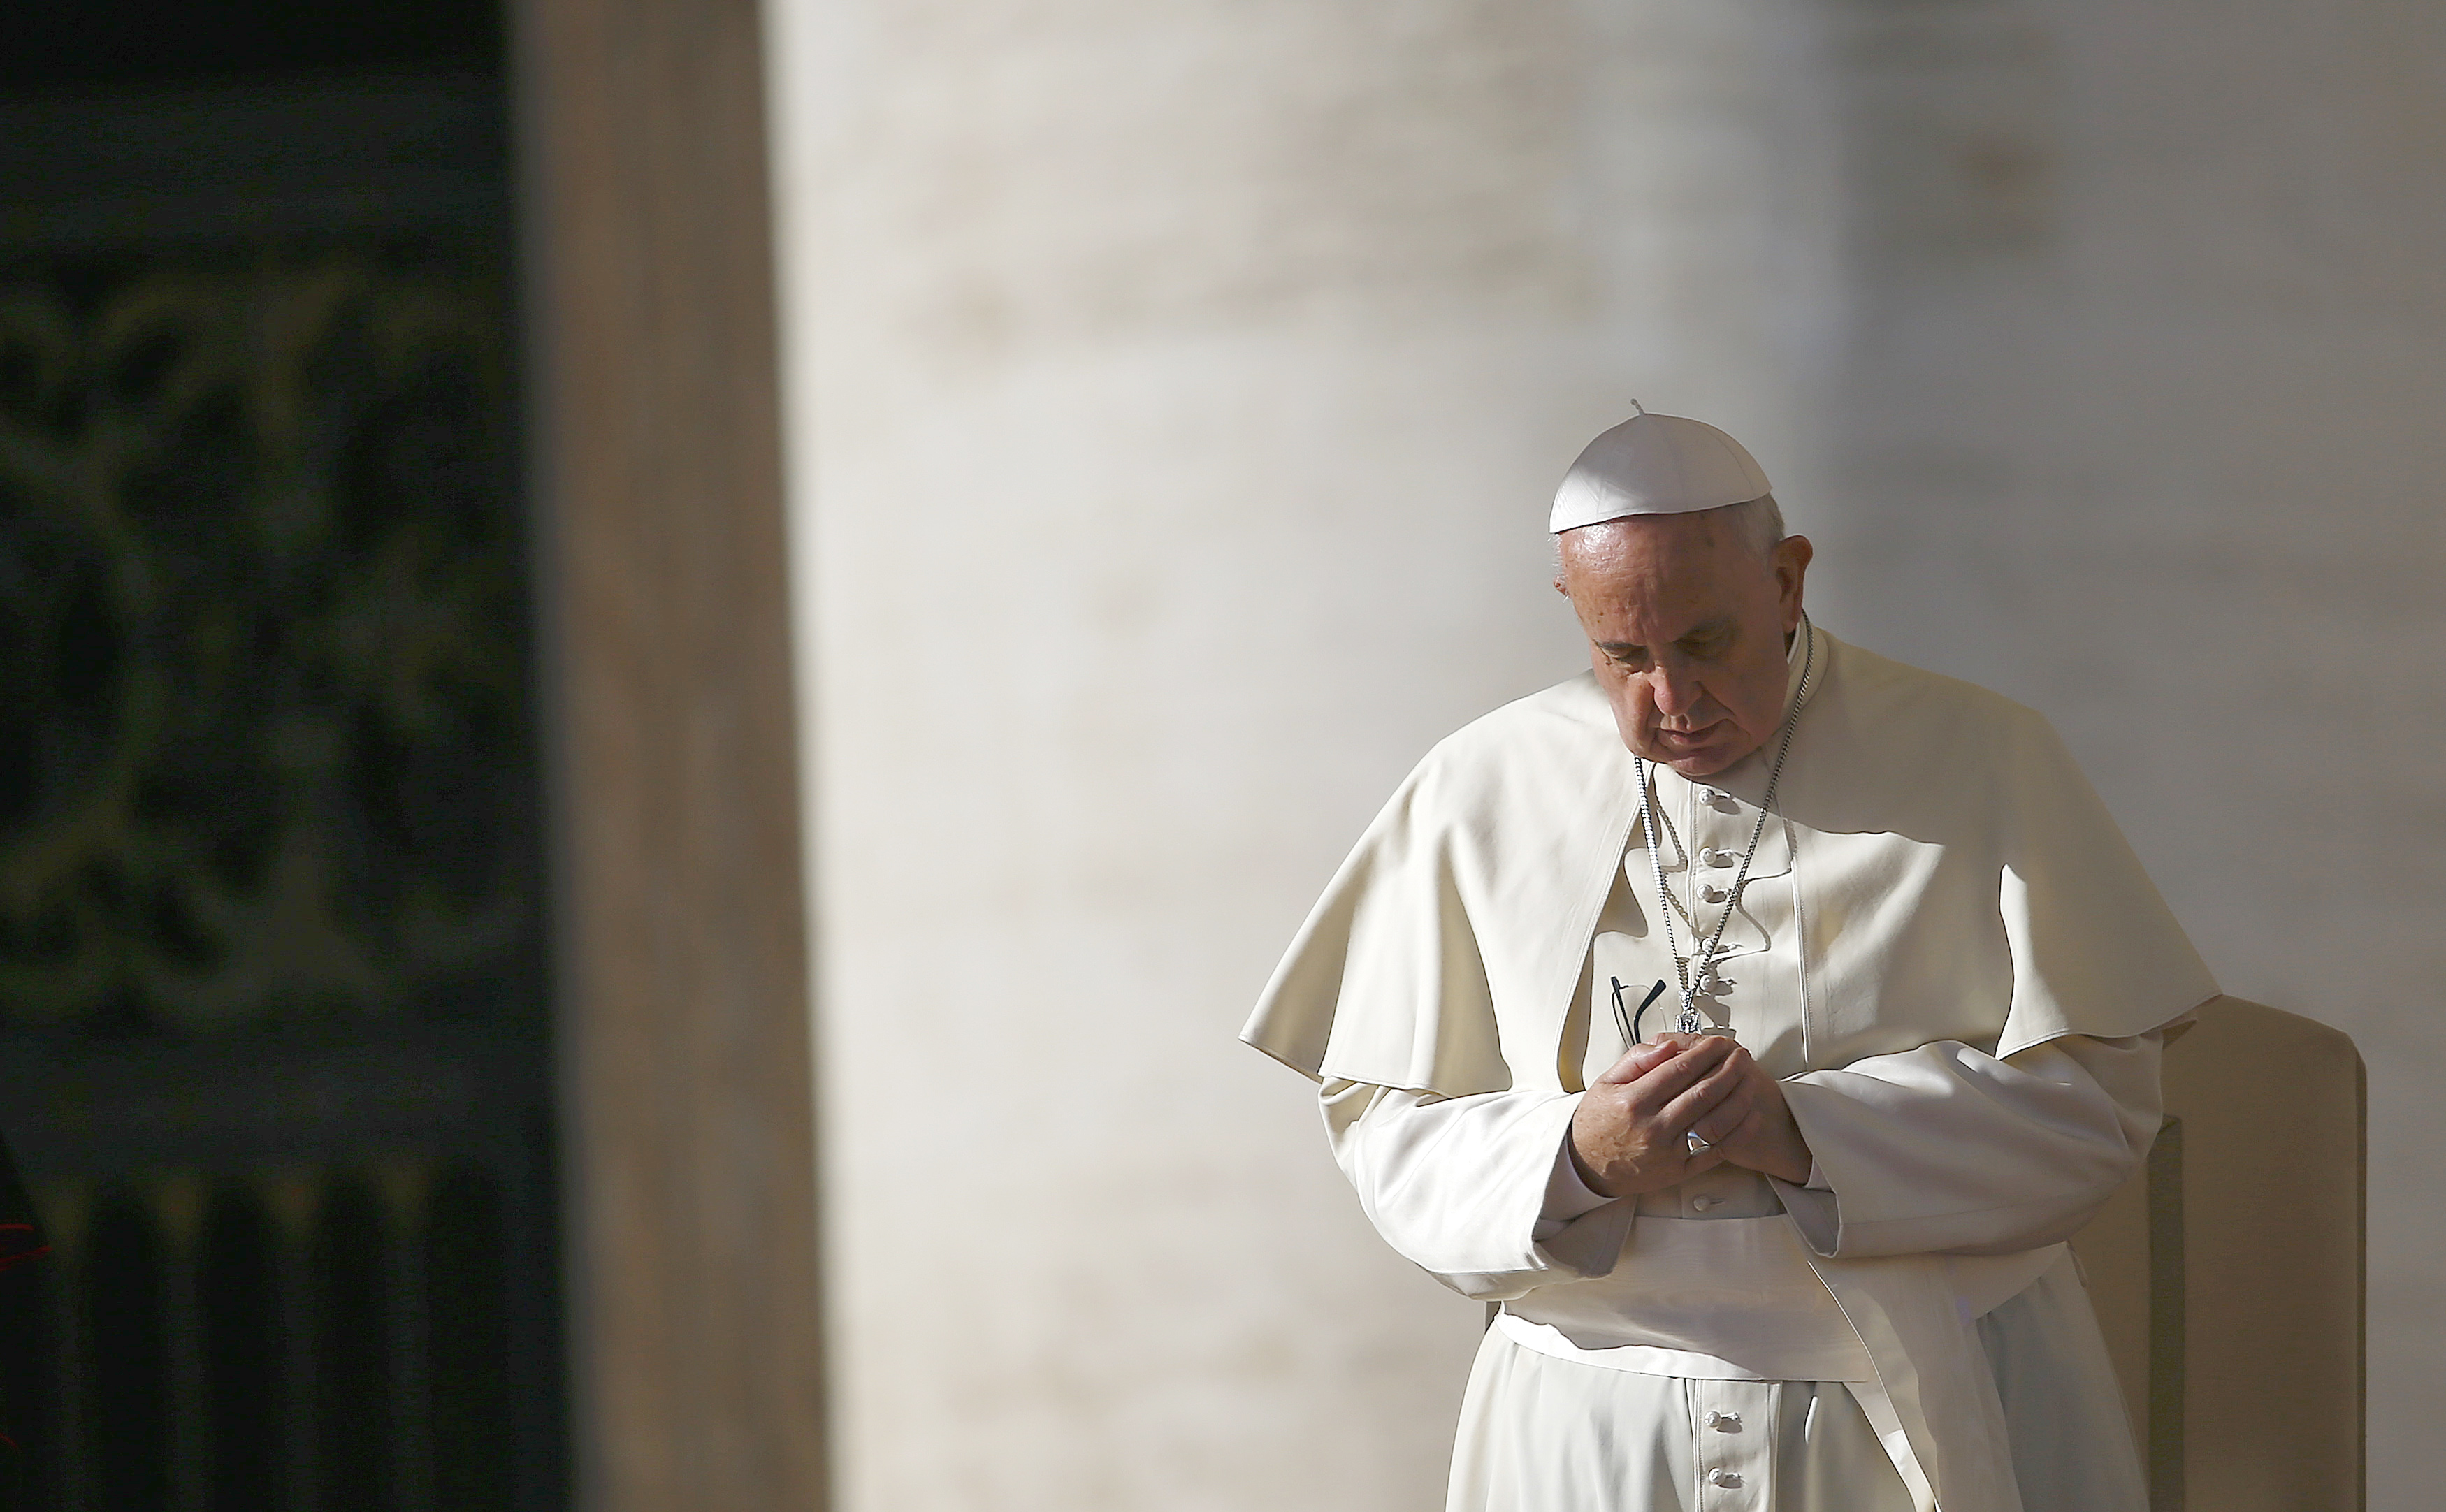 The Pope is reconsidering his stance on pivotal family issues